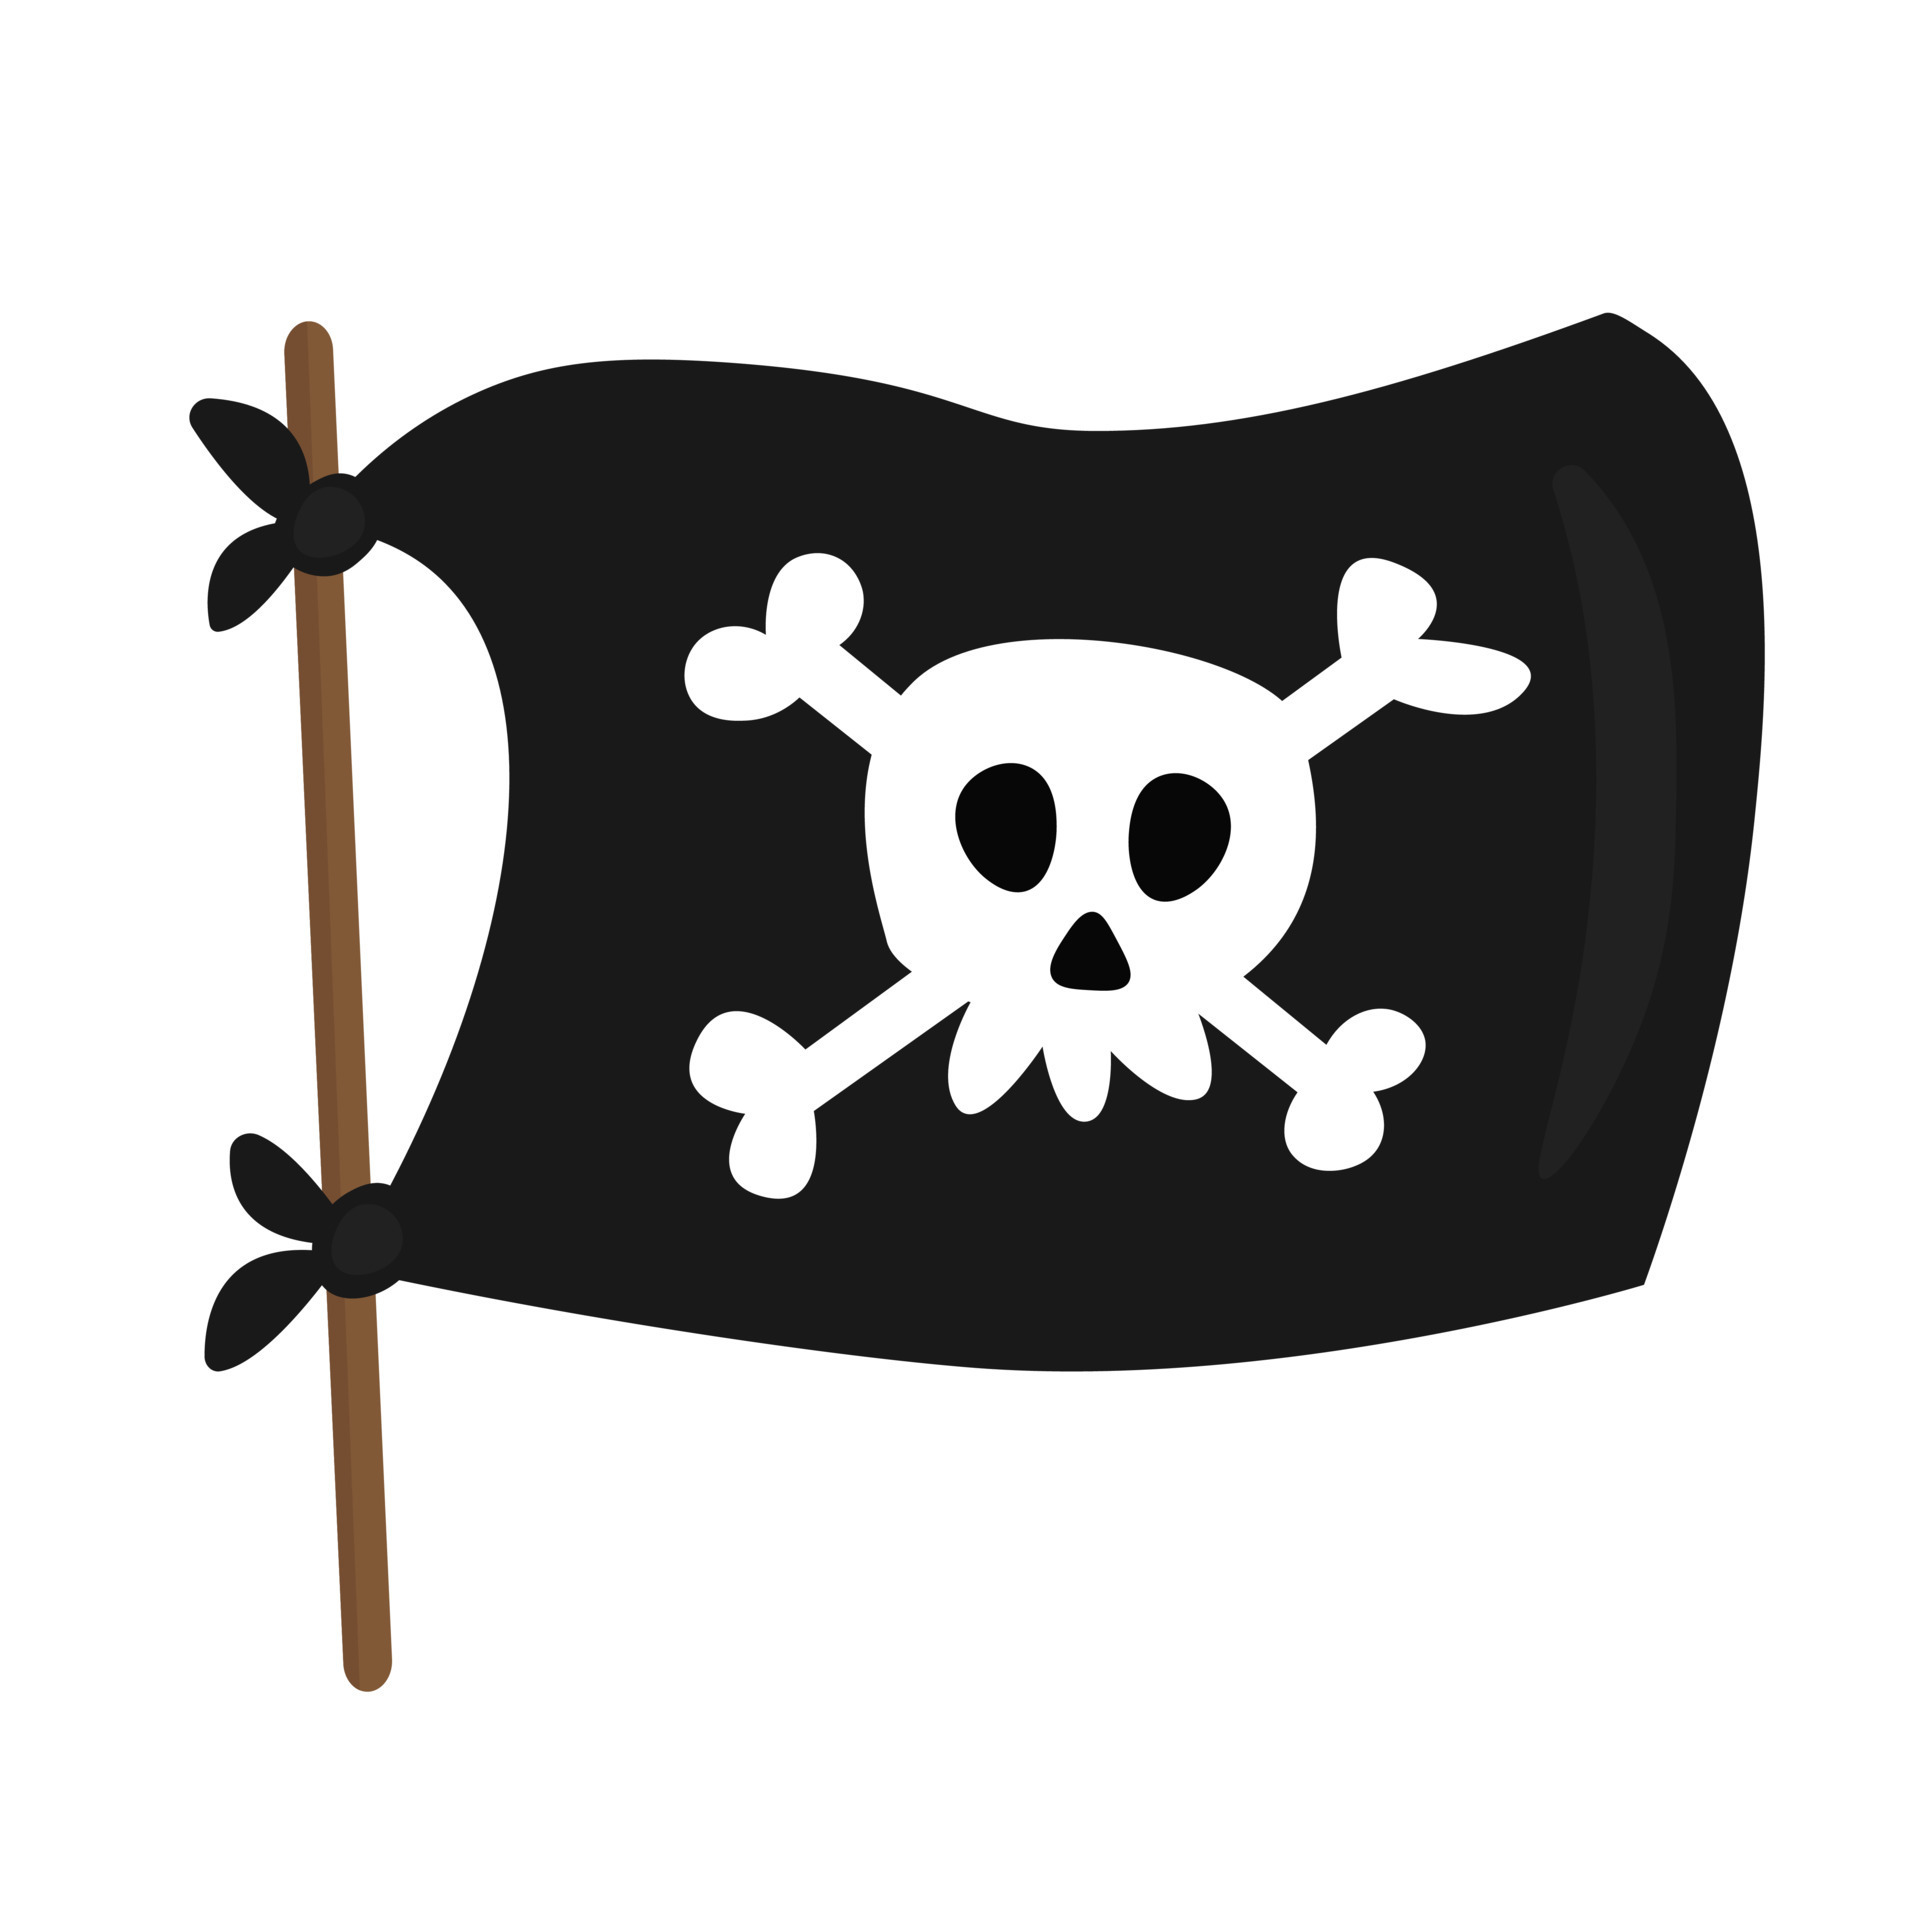 Pirate flag in cartoon style on white background. Black pirate